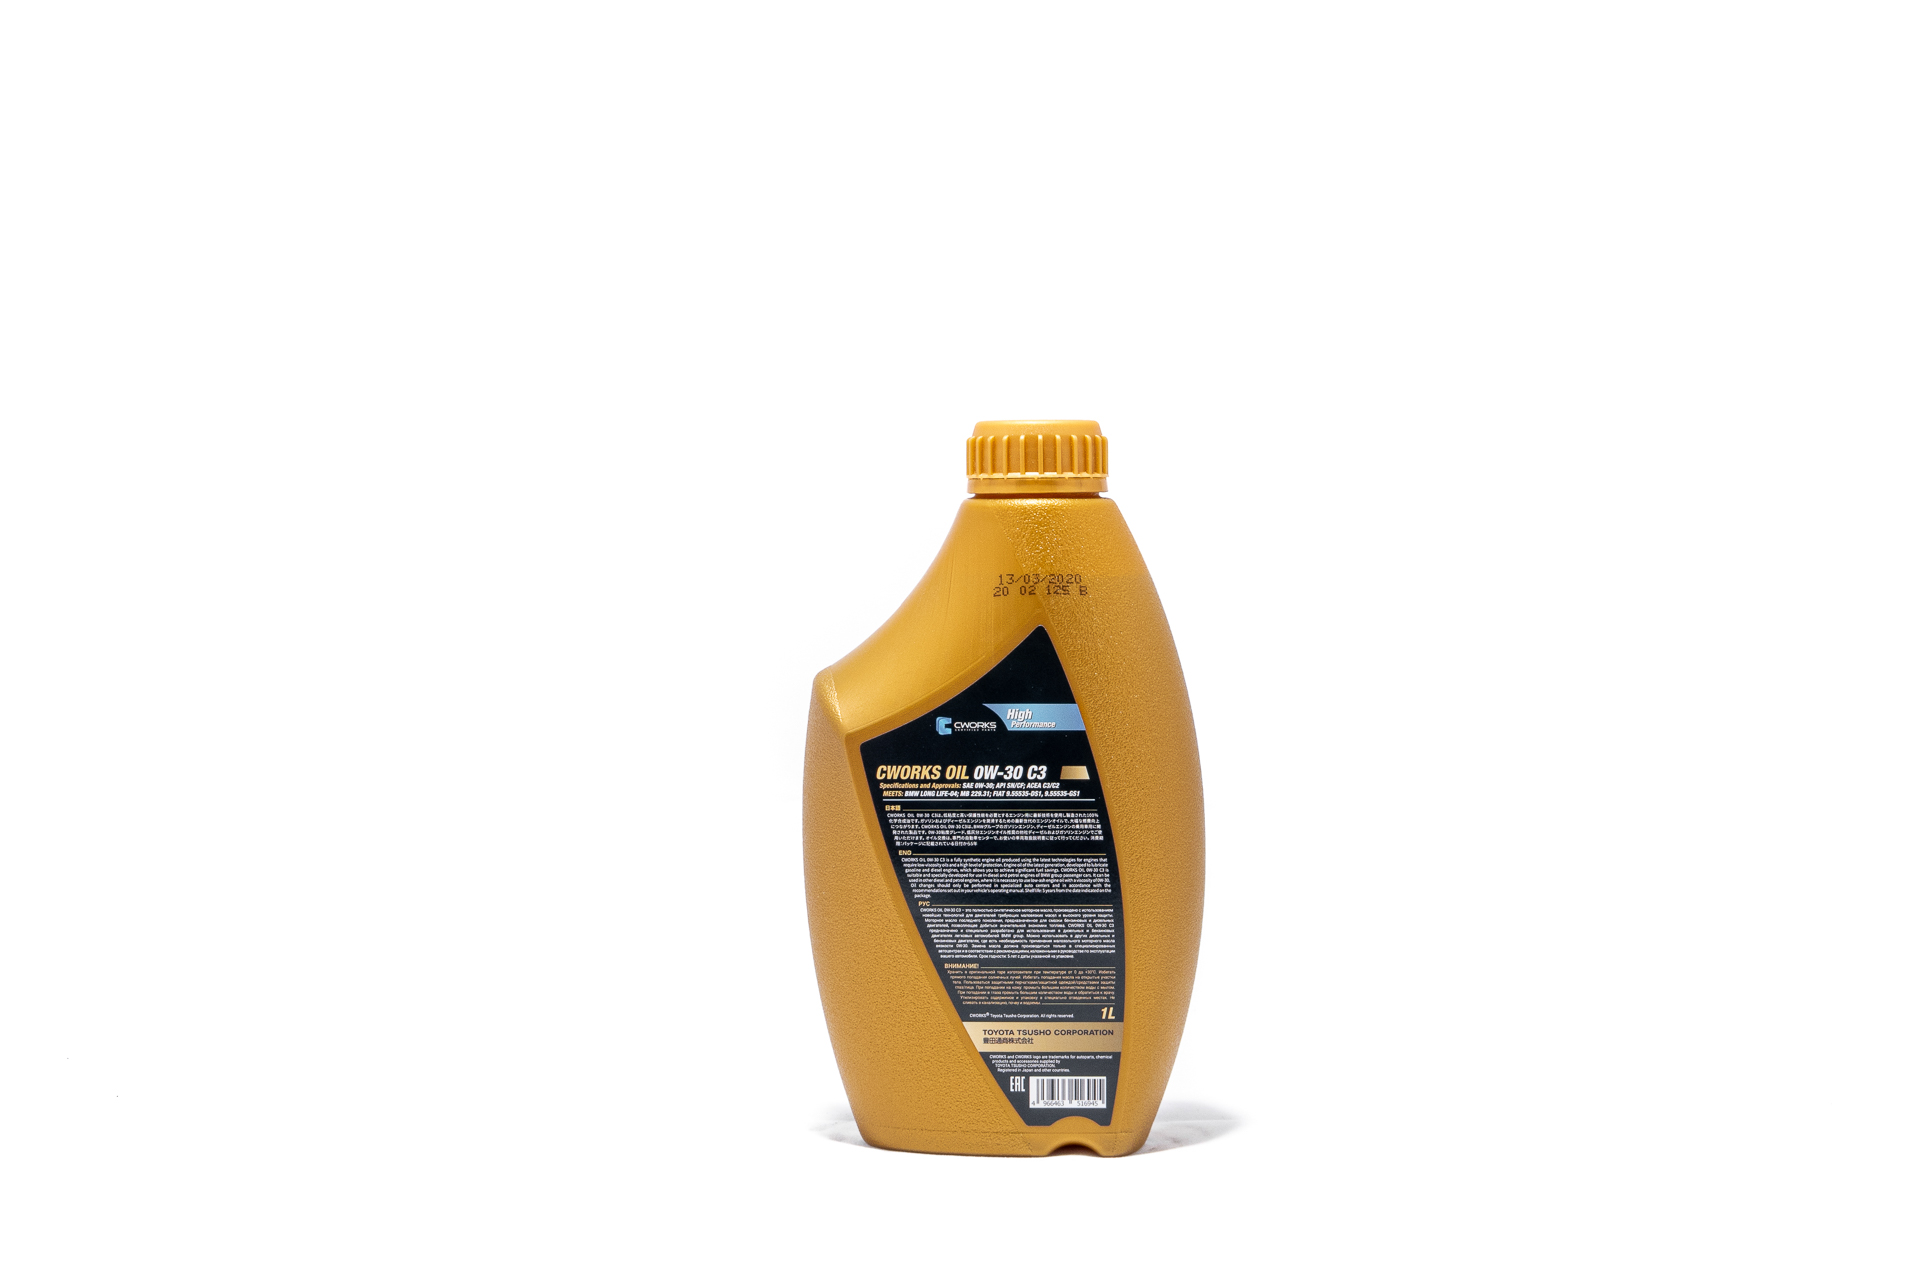 CWORKS OIL 0W-30 C3, 1L Масло моторное A130R5001